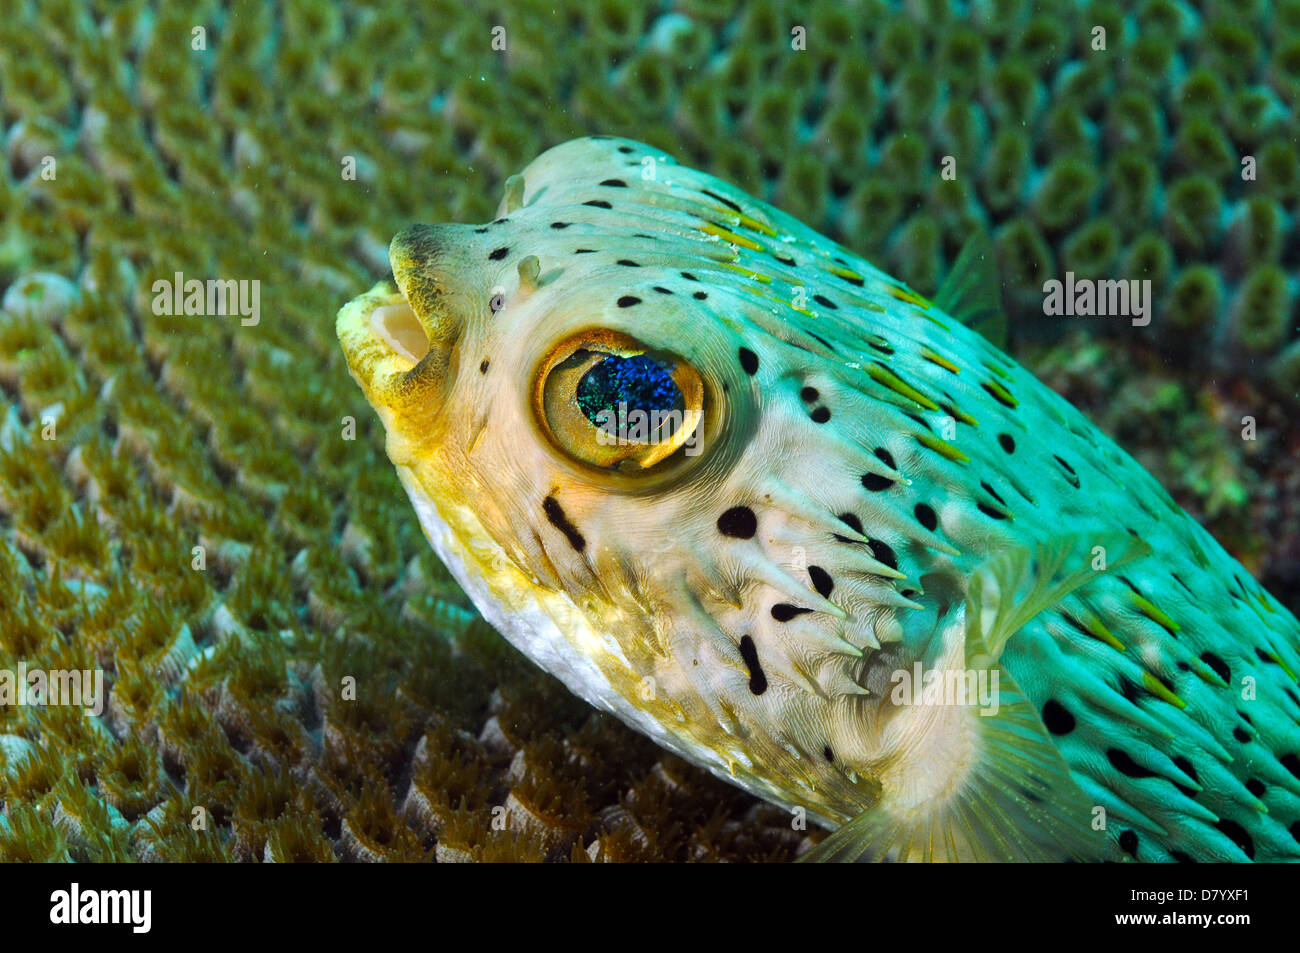 close up of blowfish underwater in ocean agains coral Stock Photo